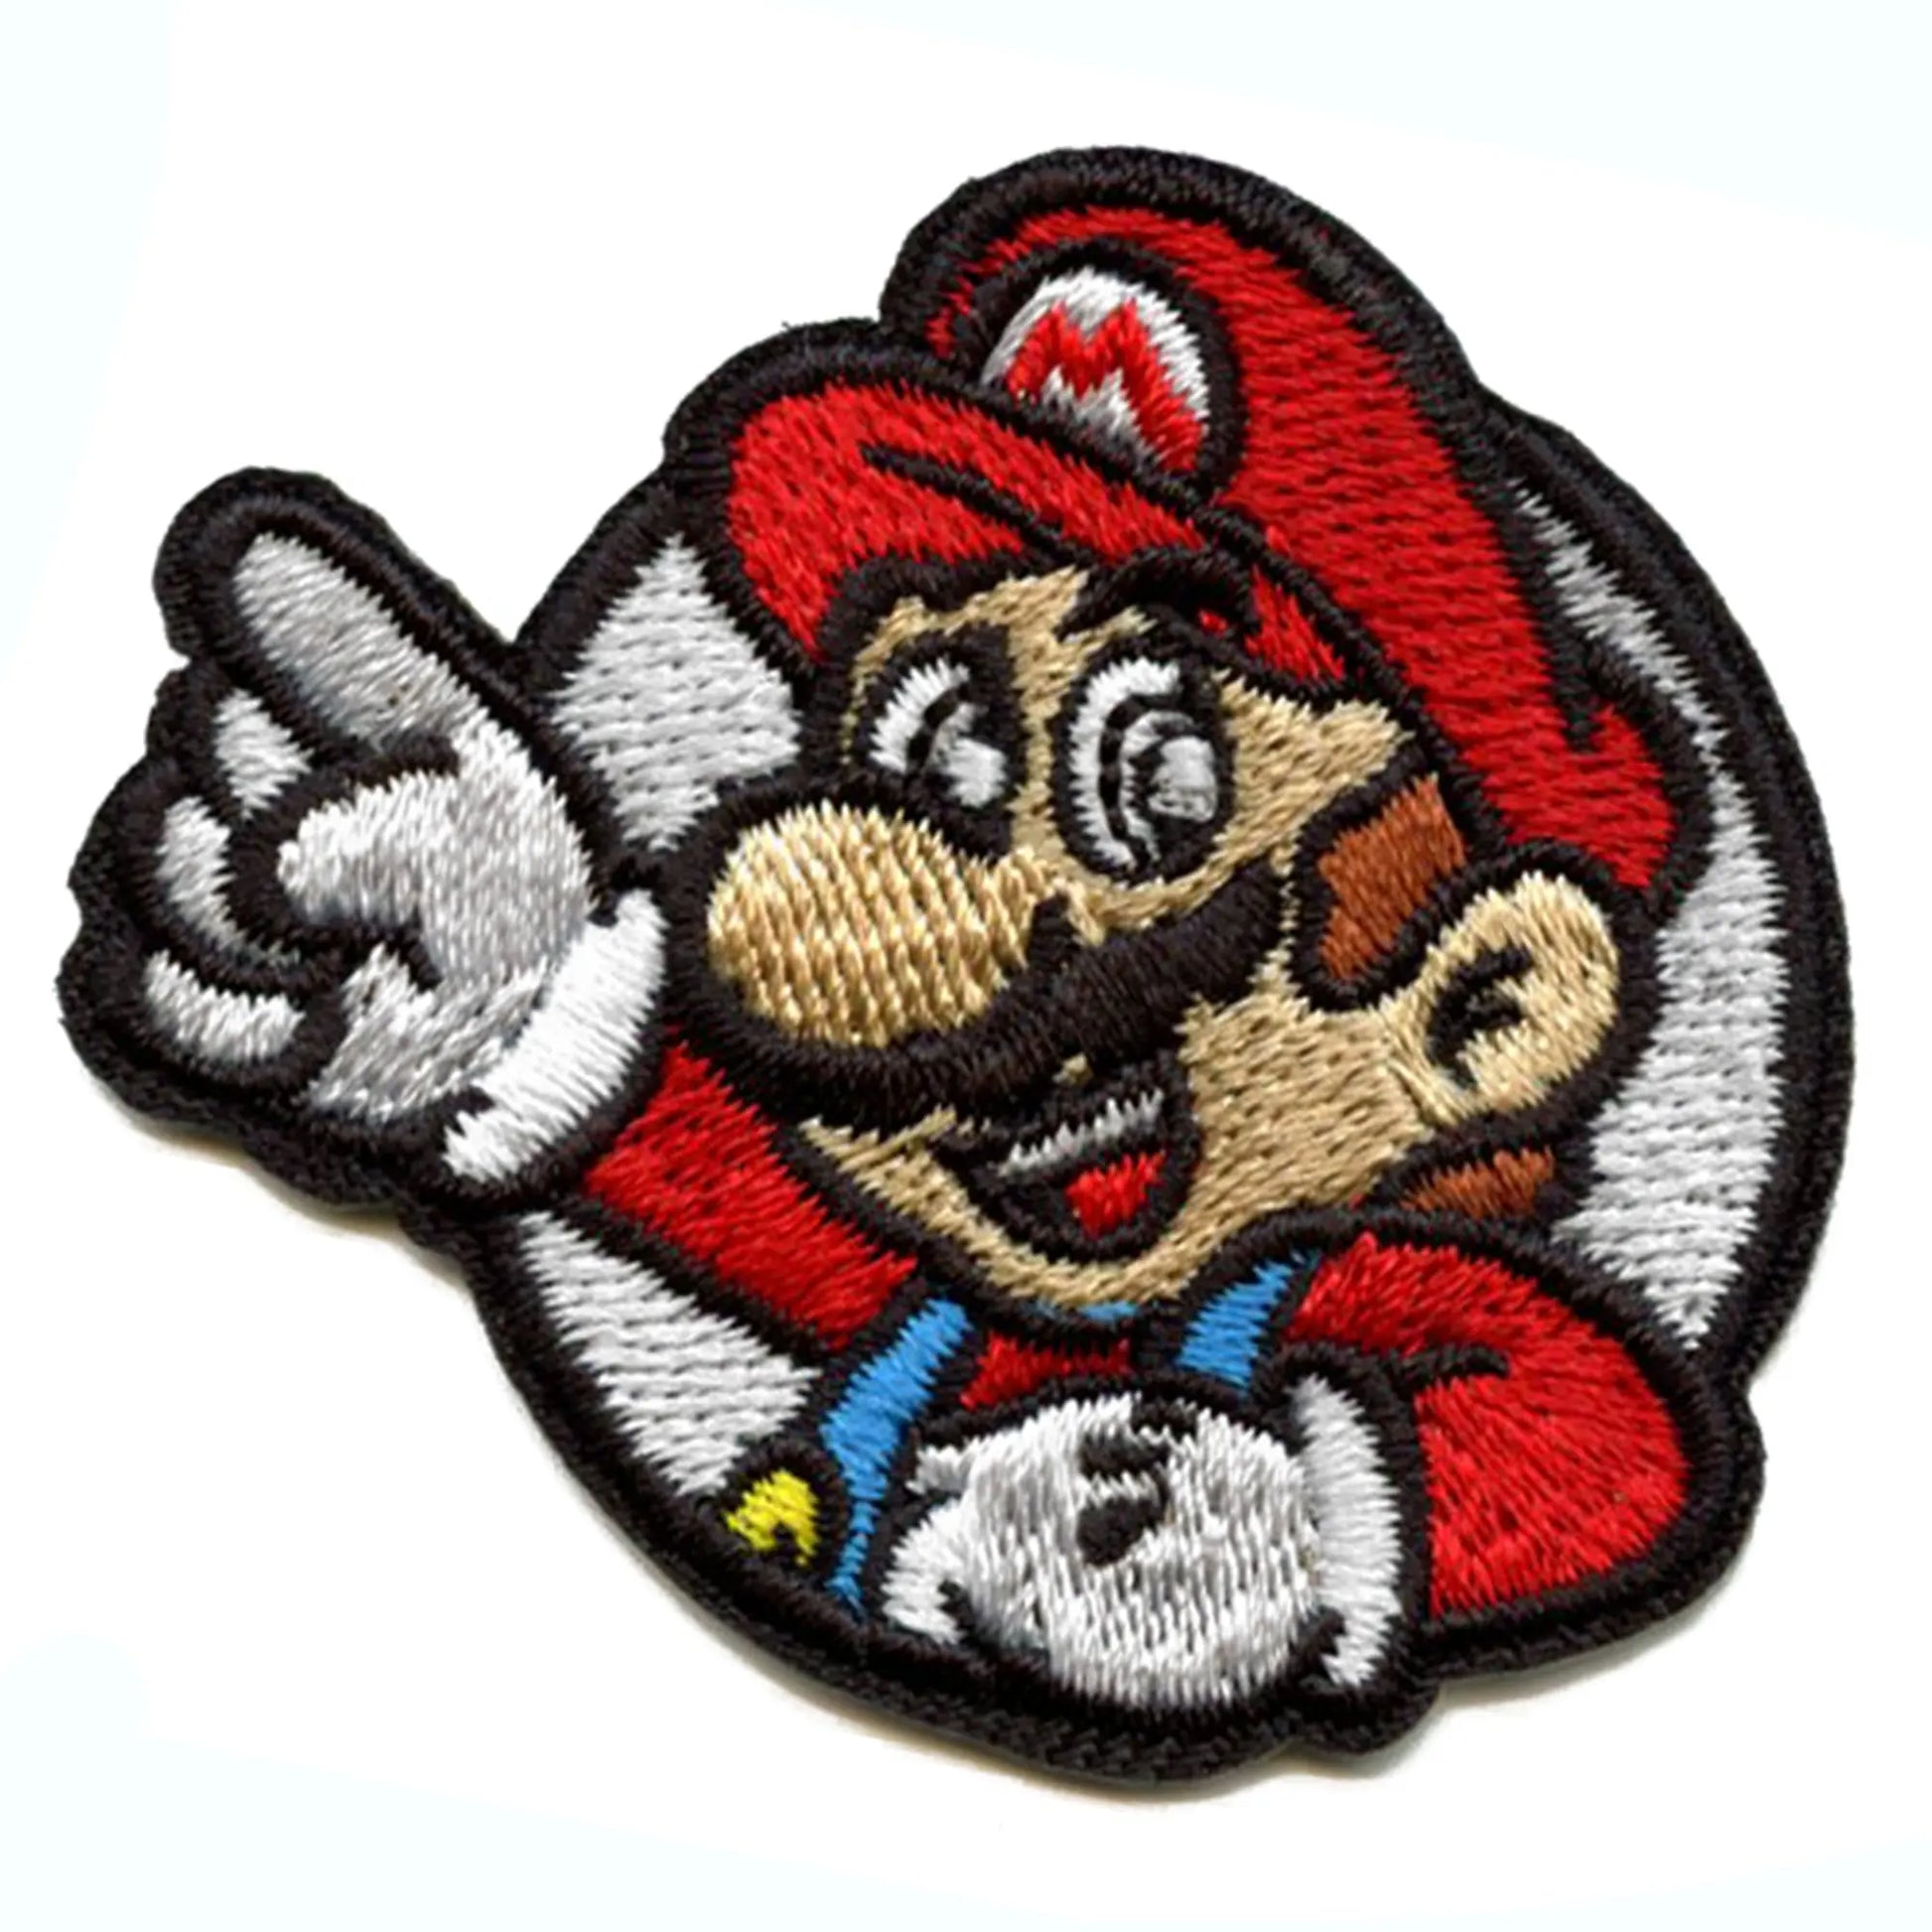 Nintendo Mario flying in space in New Super Mario Bros Embroidered Iron On  / Sew On Patch Applique